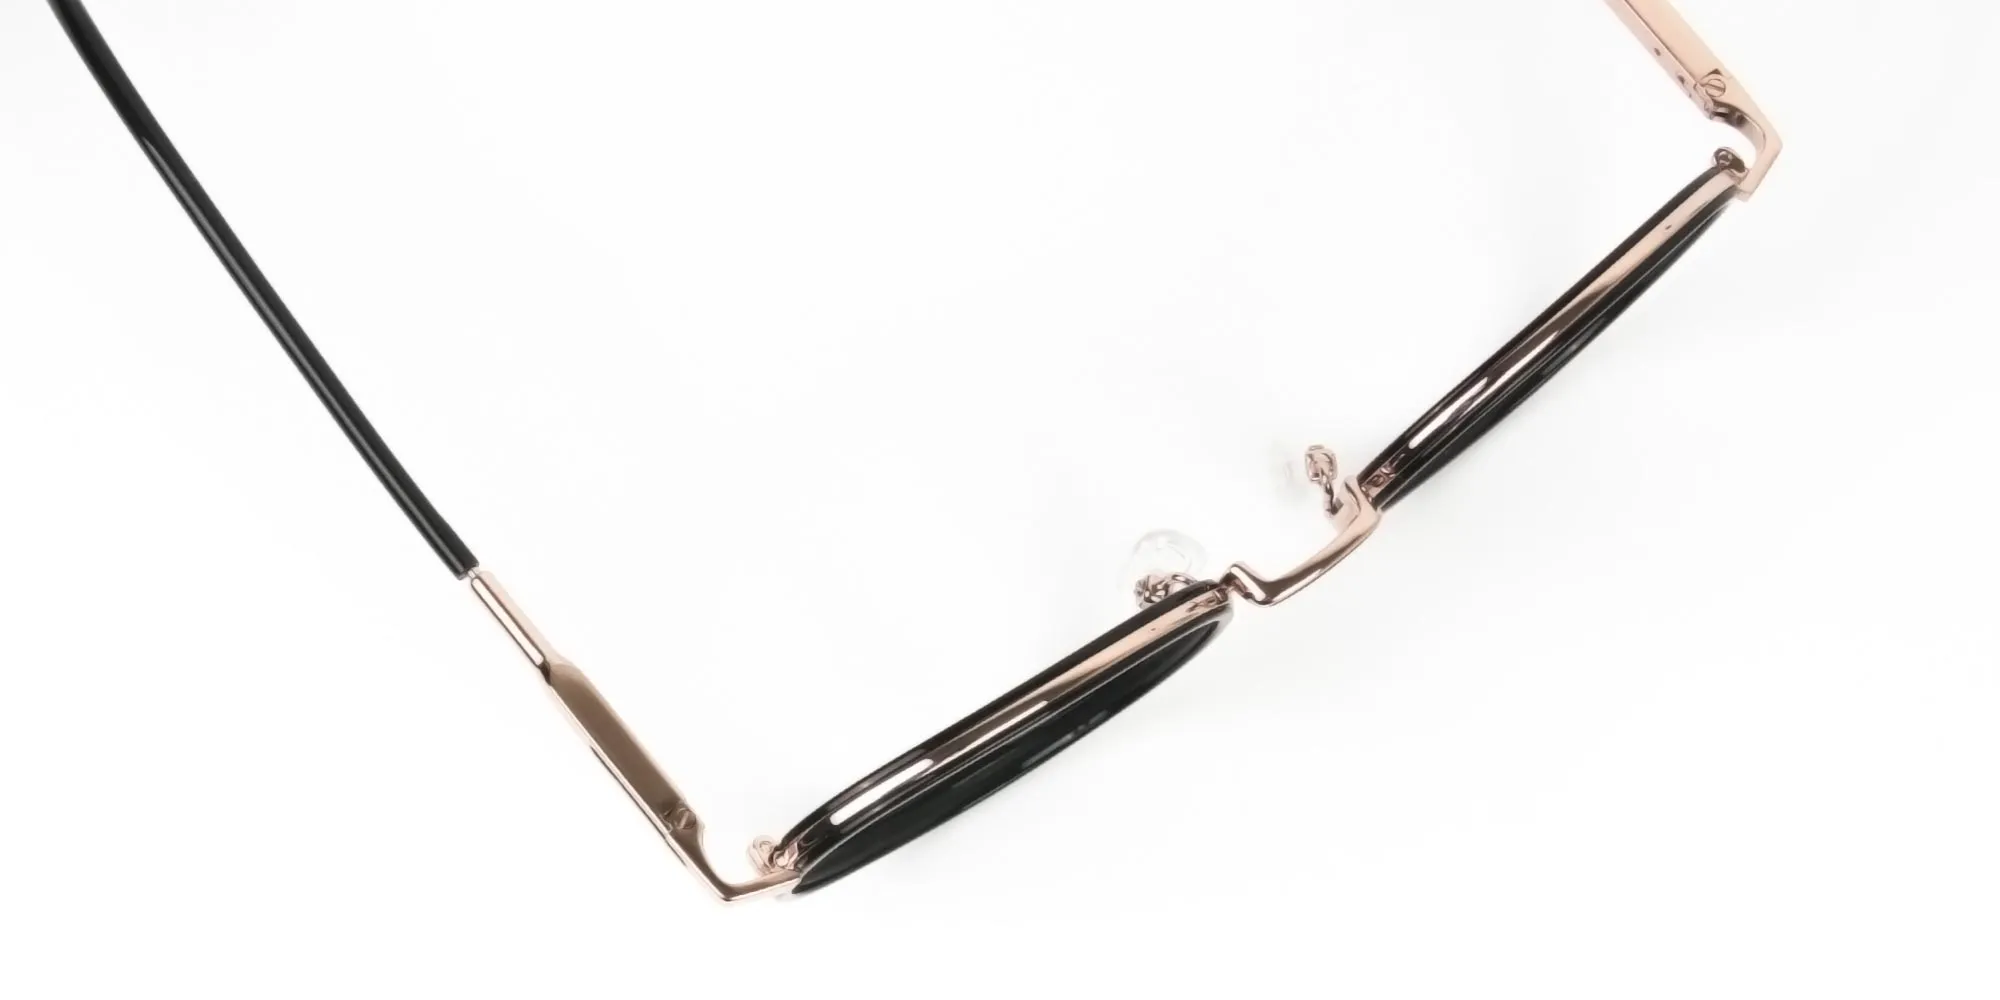 Black and Rose Gold Eyeglasses in Round -2